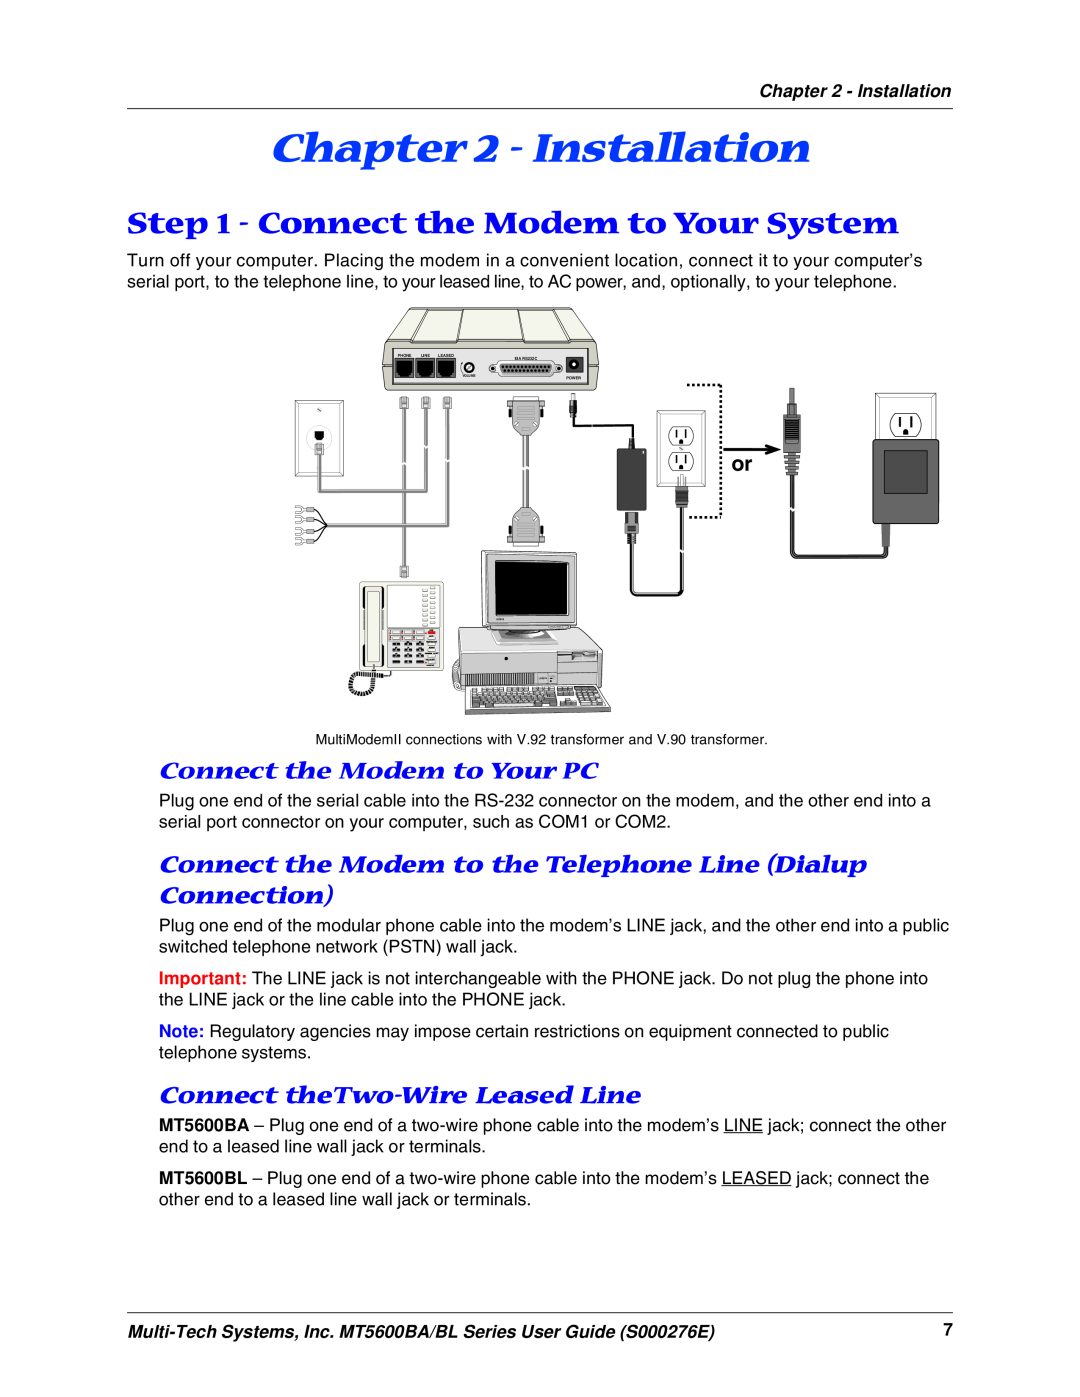 Multitech MT5600BA manual Connect the Modem to Your System, Connect the Modem to Your PC, Connect theTwo-Wire Leased Line 